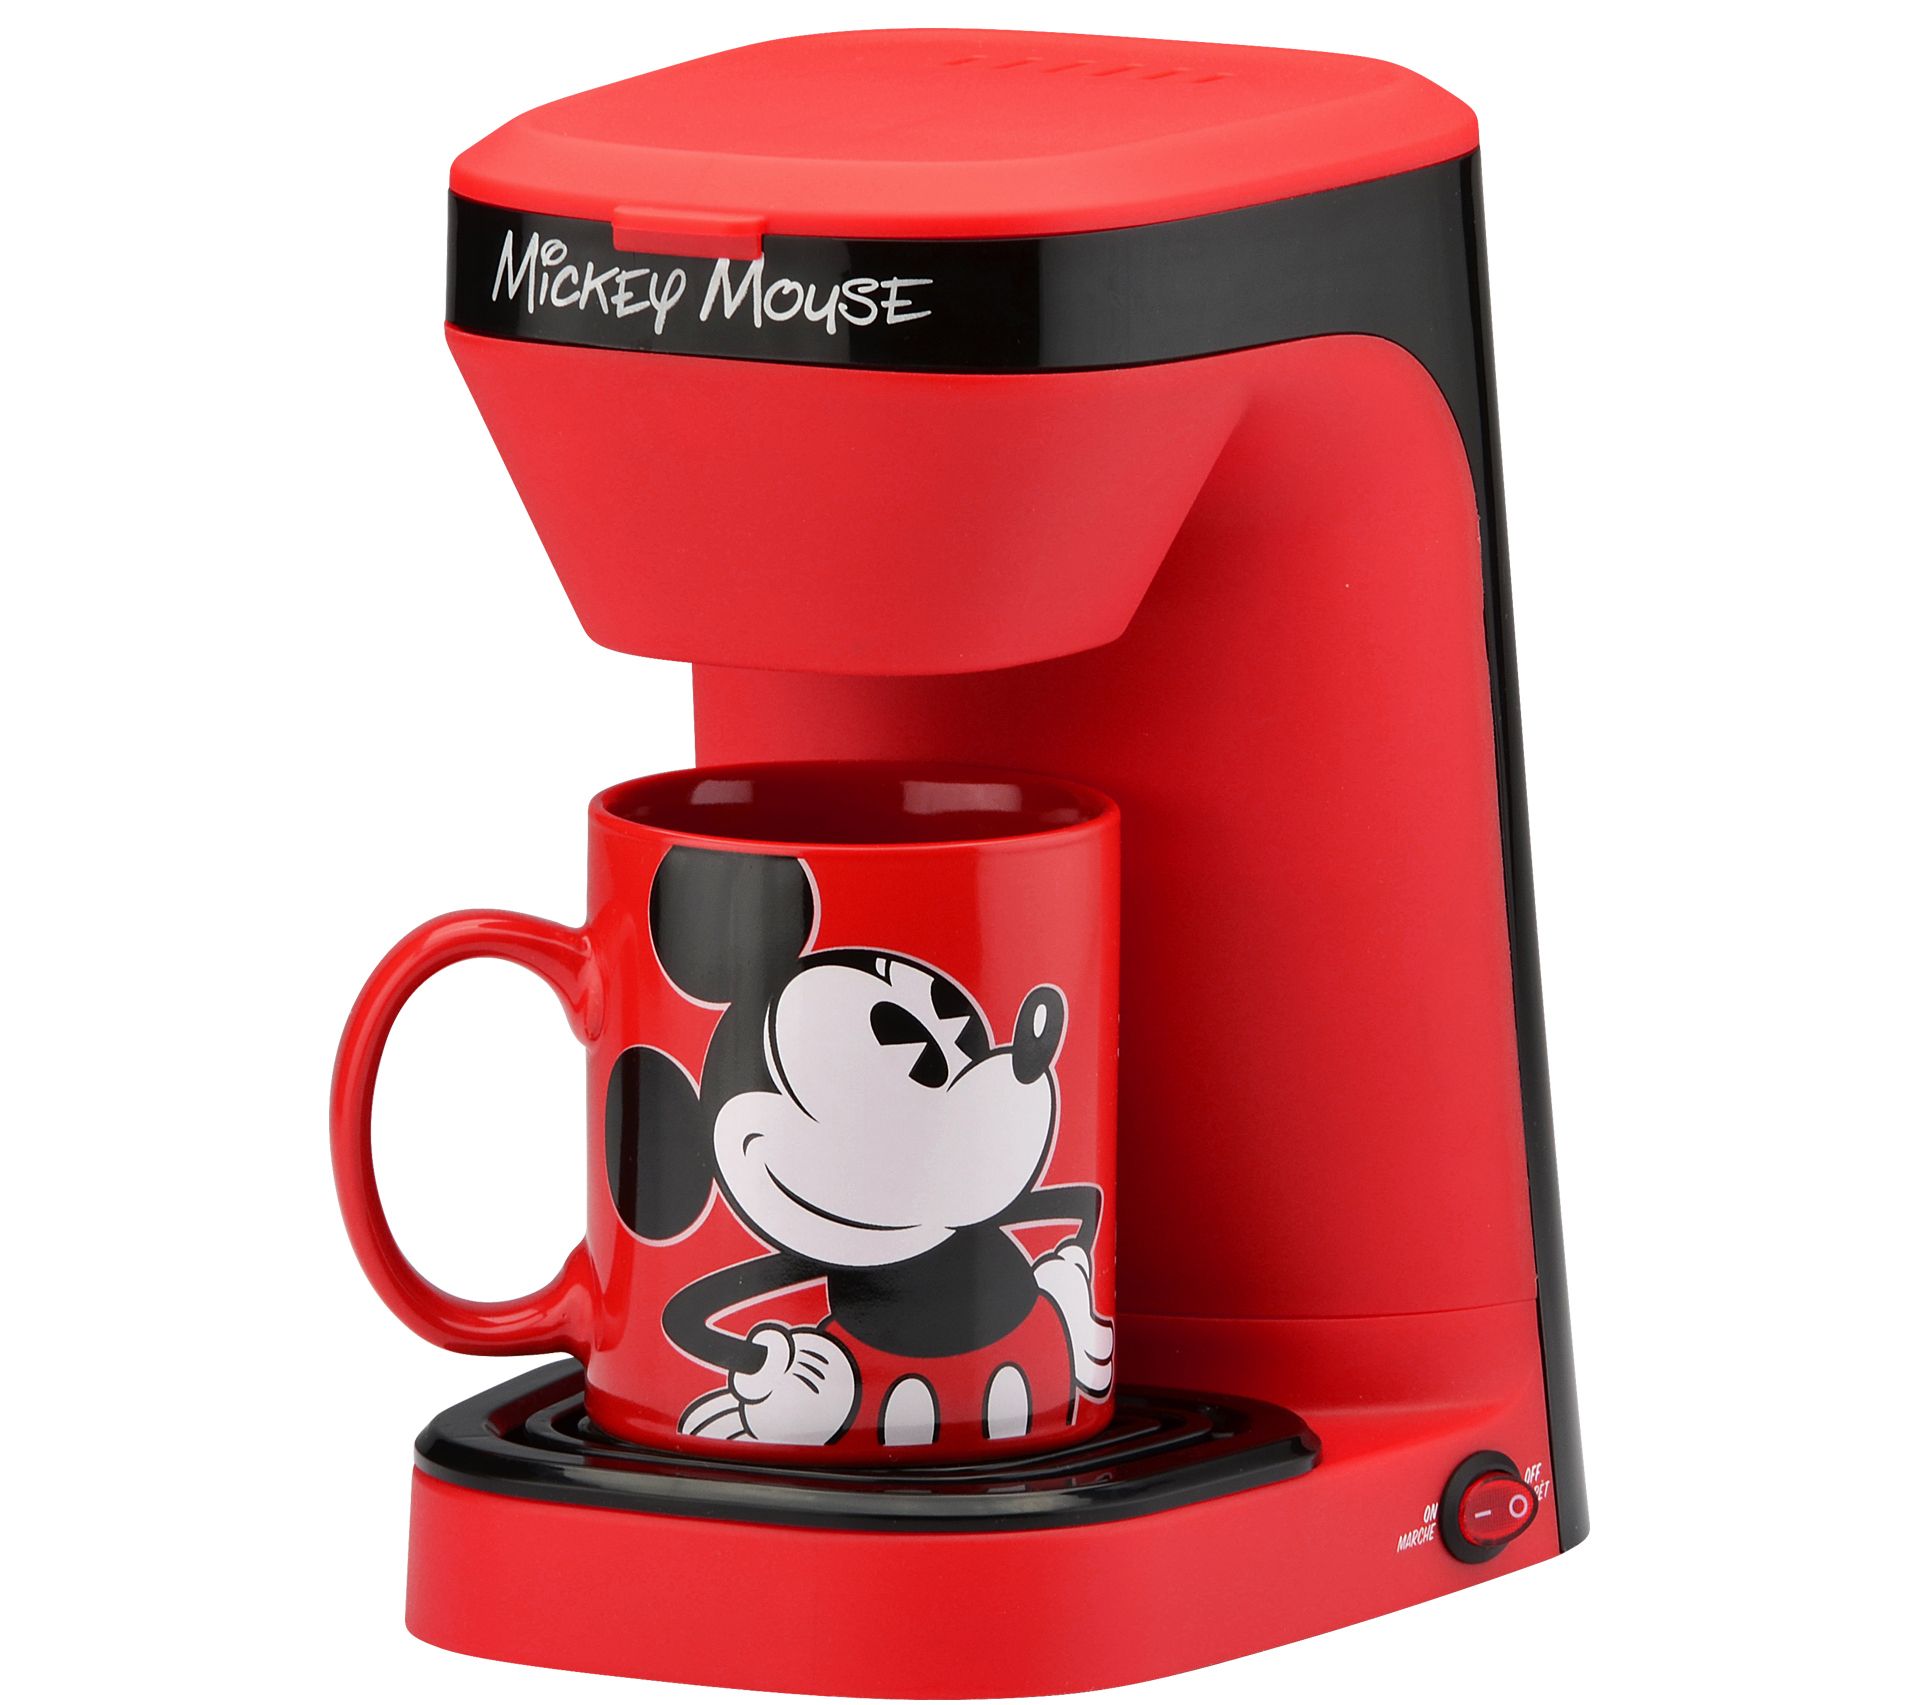 Disney Mickey Mouse 1-cup Coffee Maker 